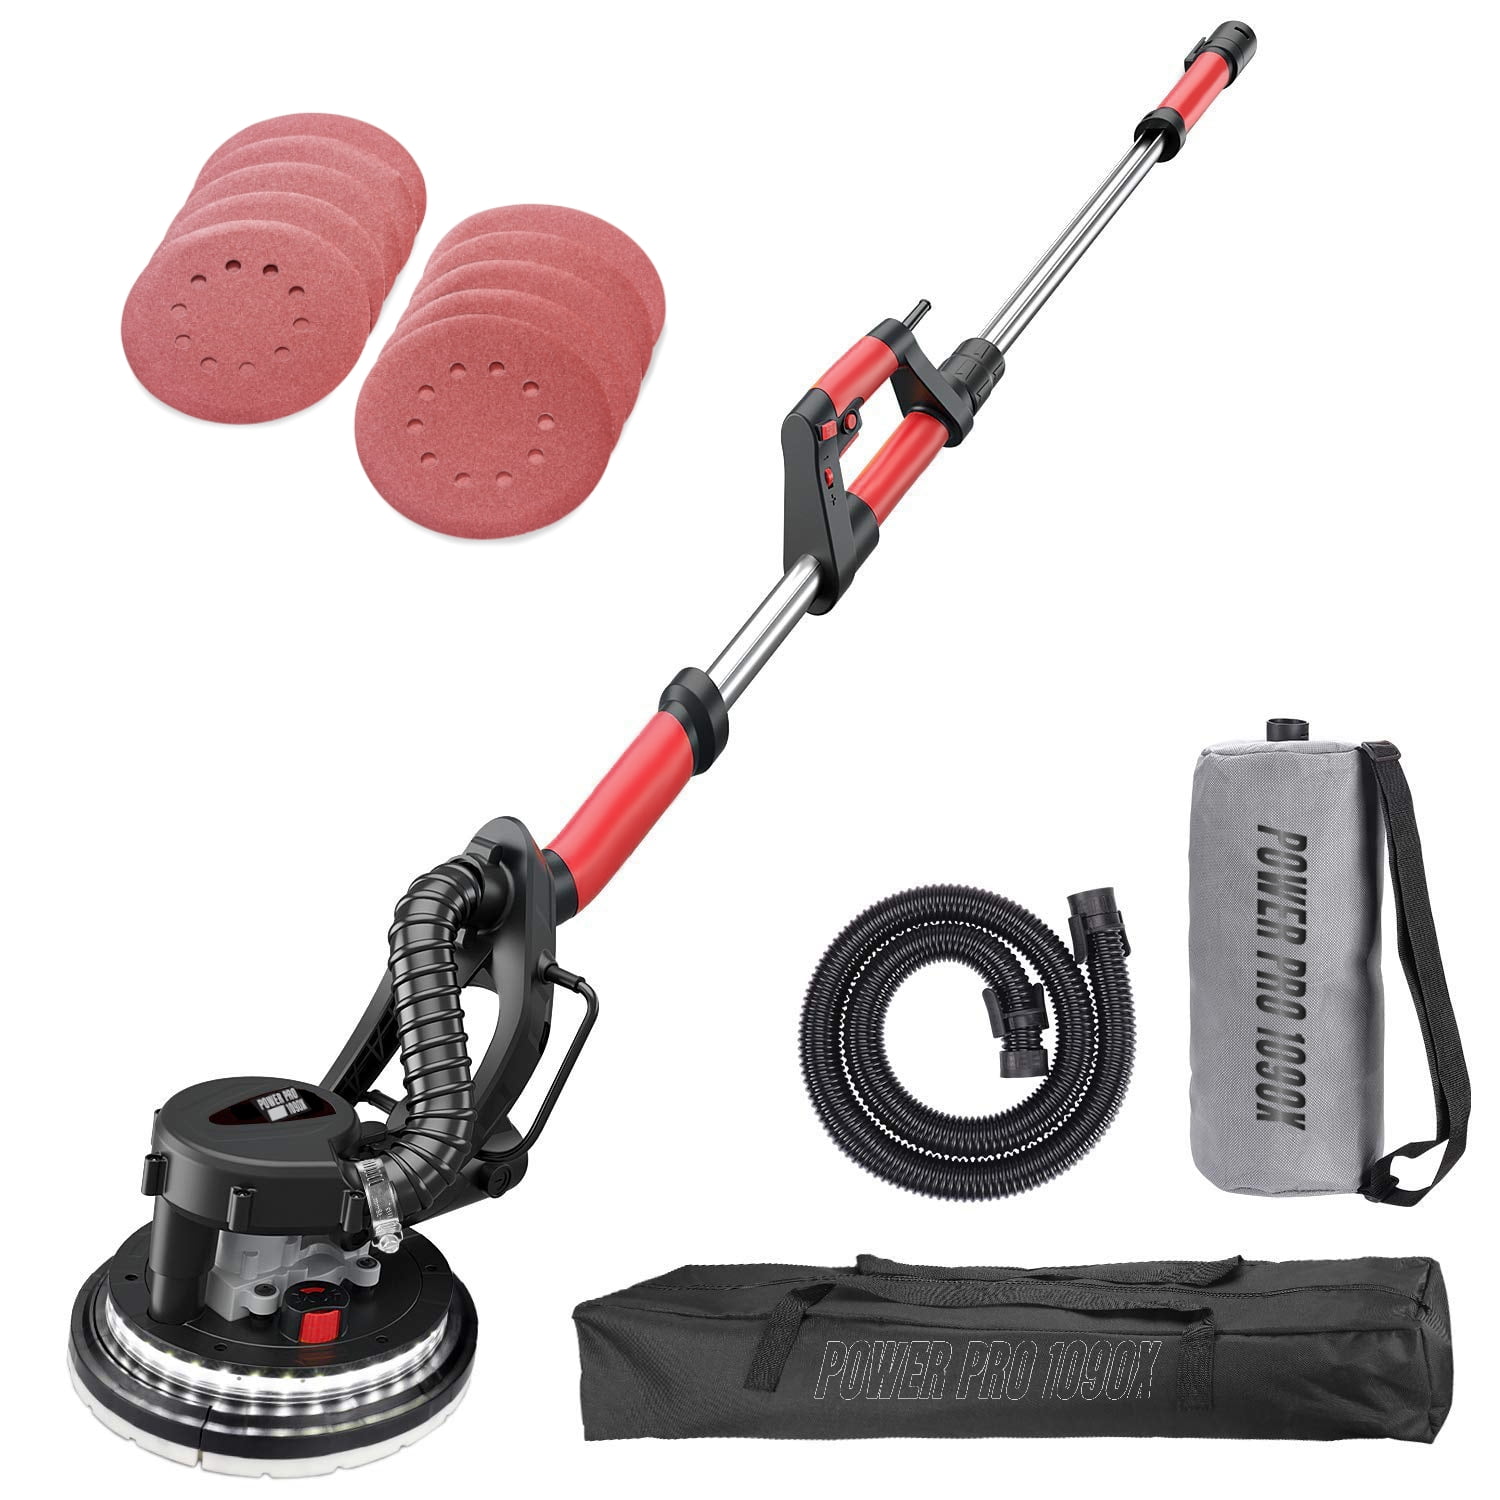 New Electric Drywall Sander Adjustable Variable Speed With Sanding Pad 800W TET 